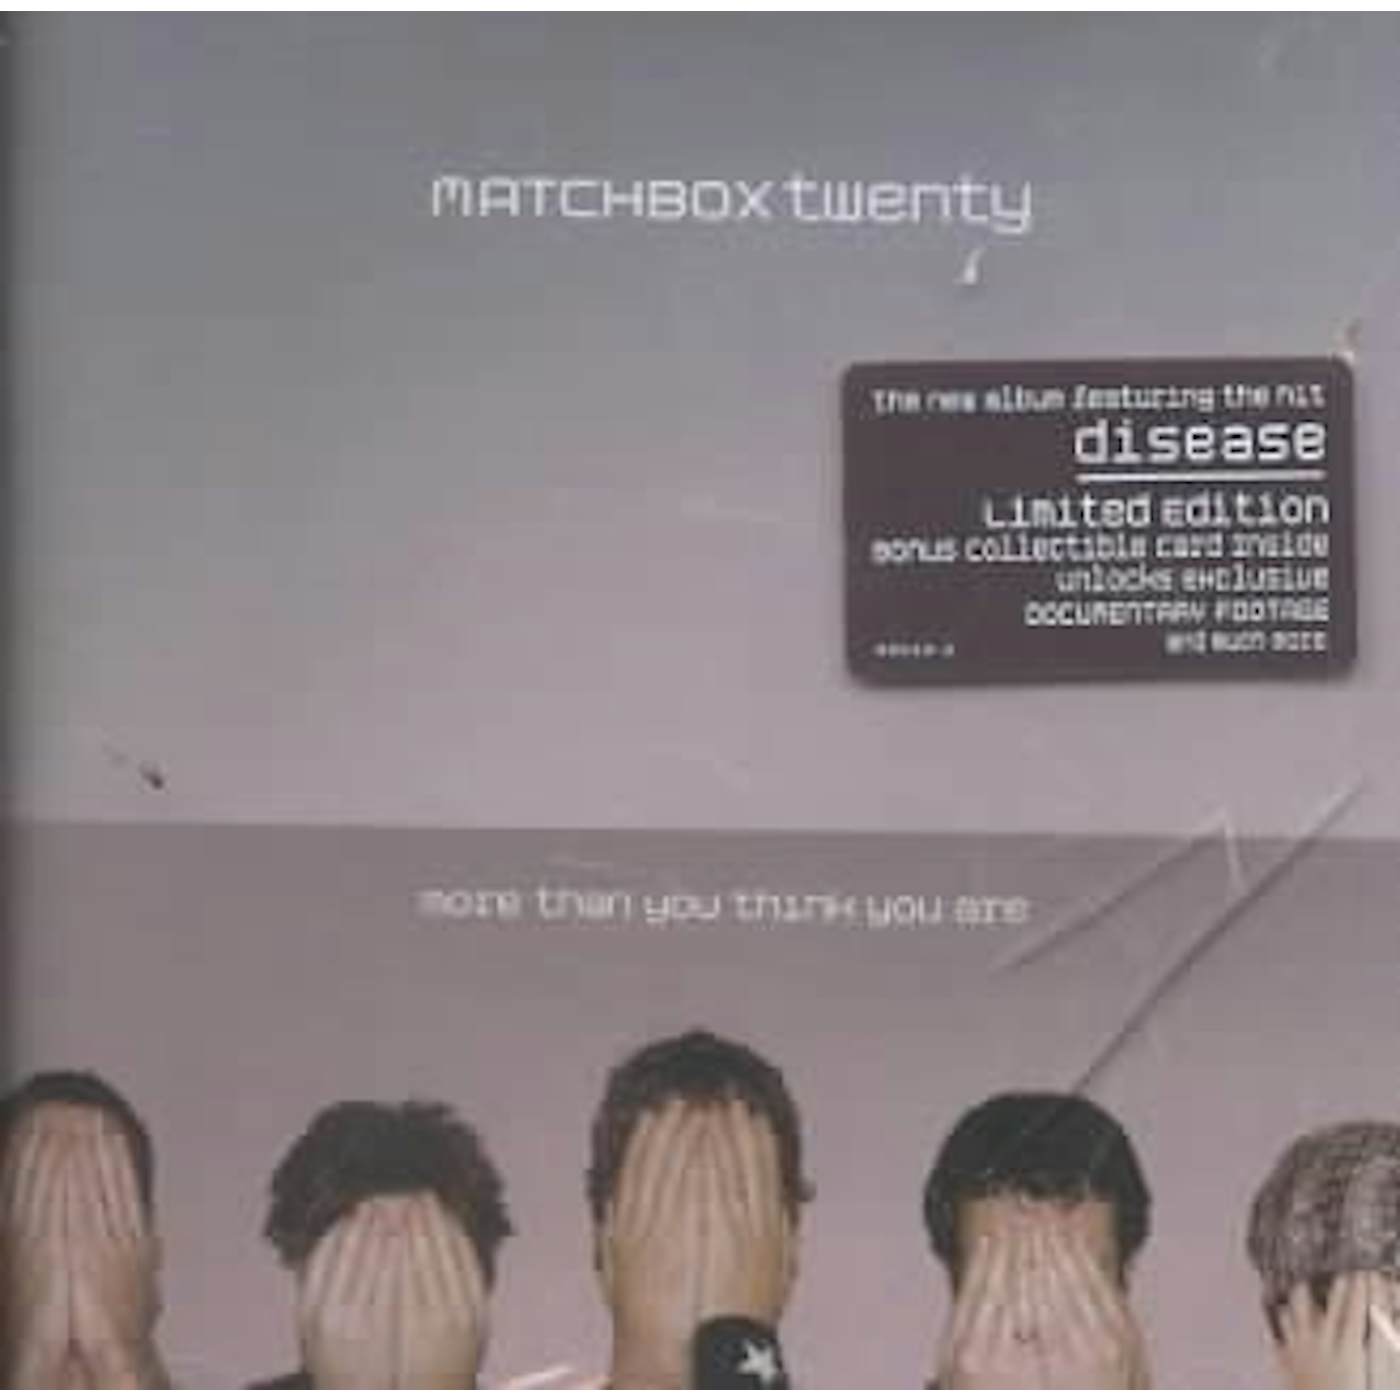 Matchbox 20 More Than You Think You Are CD